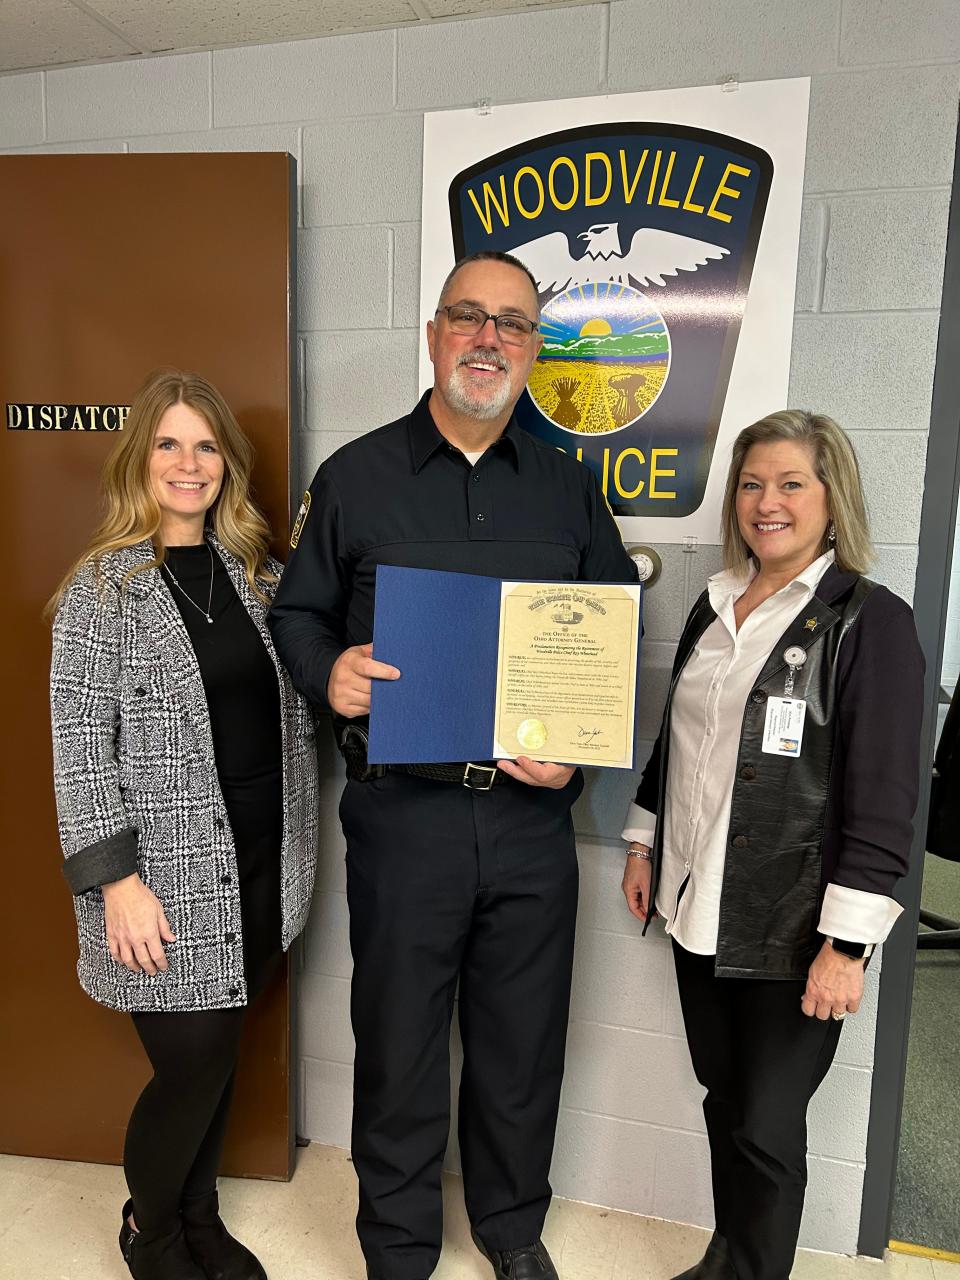 Chief Roy Whitehead, center, standing with his wife, Lori Whitehead, right, receives a certificate from Regional Director Kim Priestap from the Ohio Attorney General's Office.